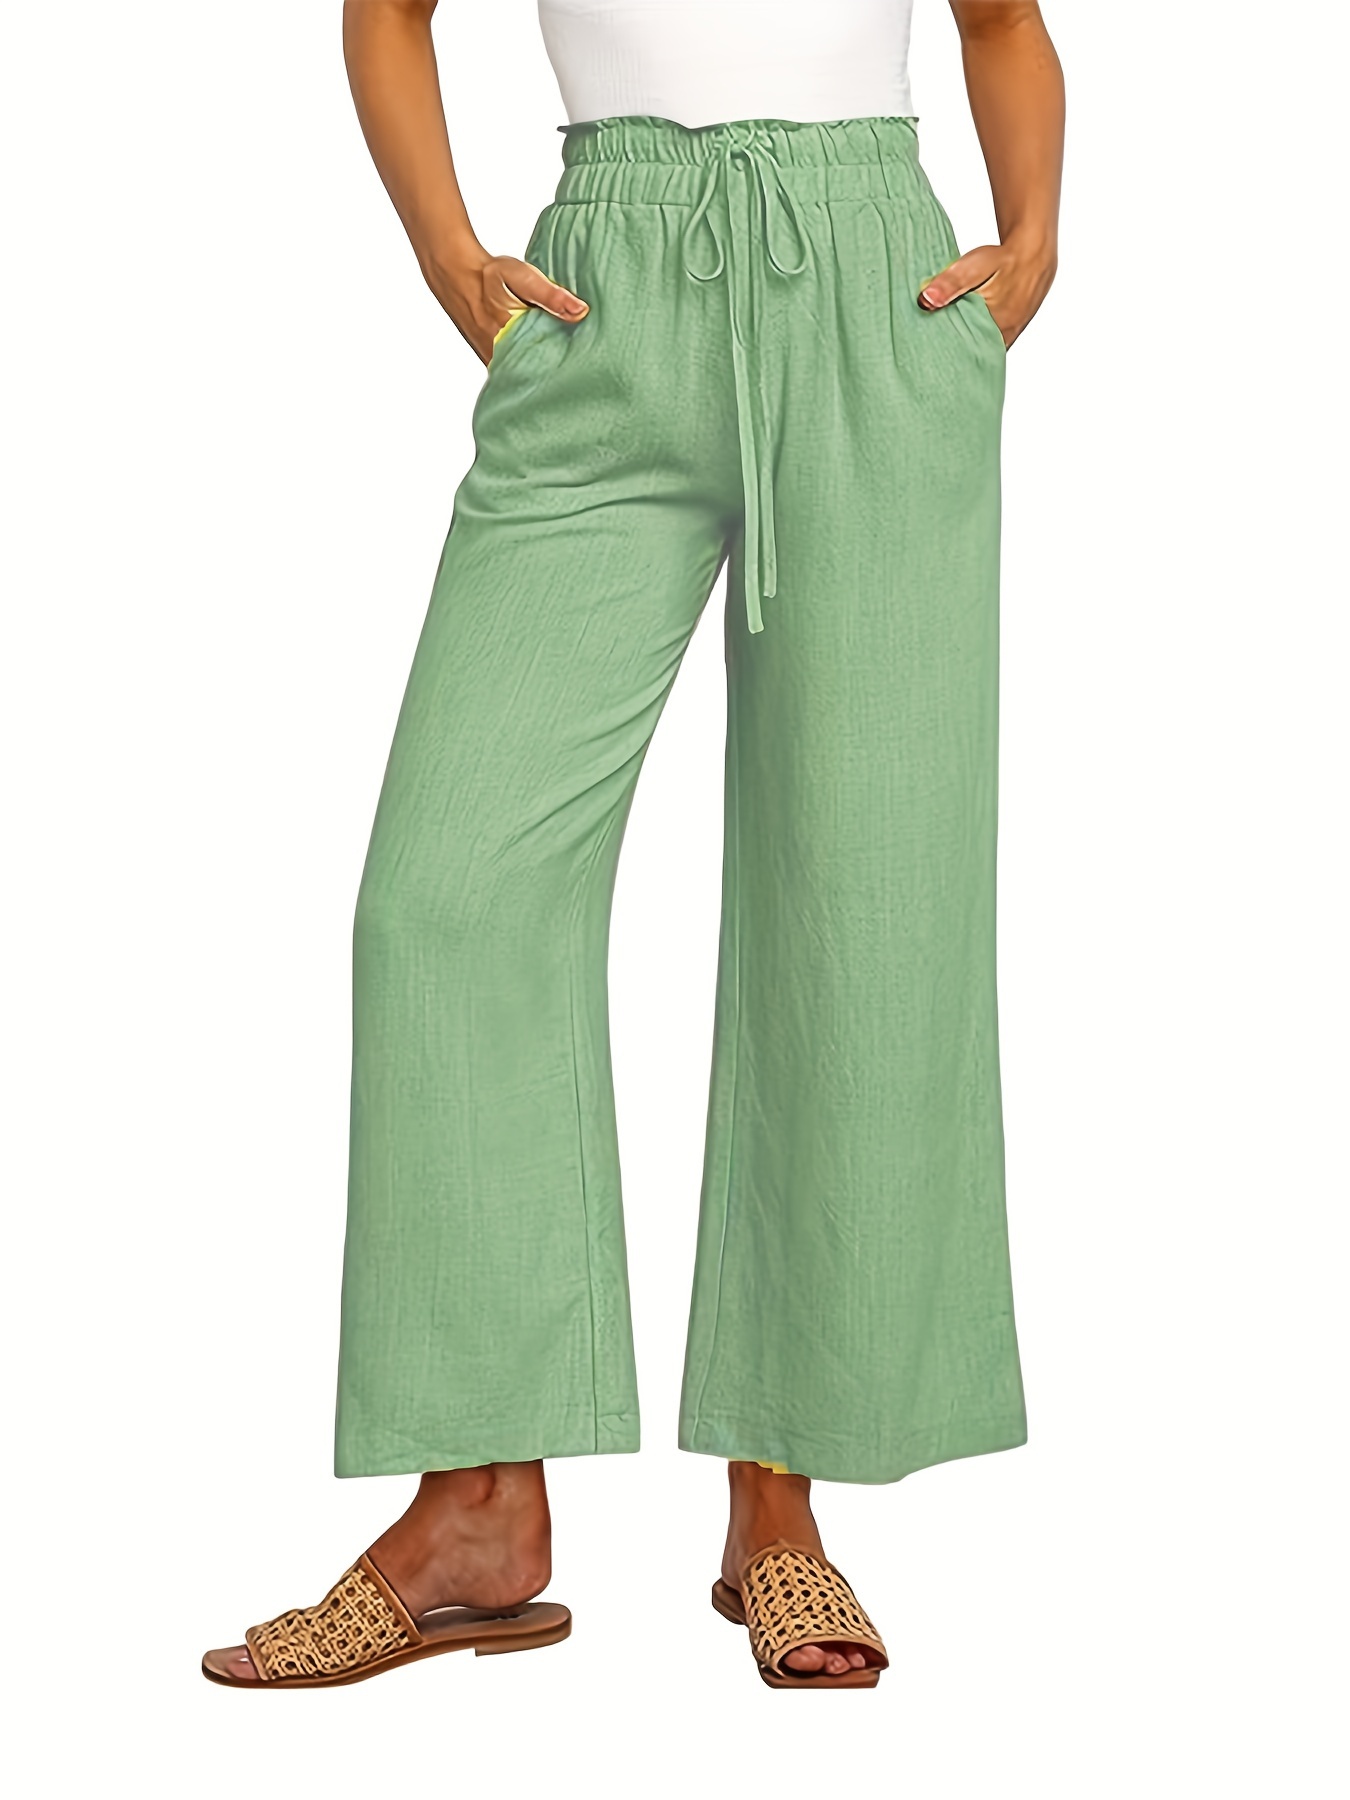 womens casual loose high waist linen pants drawstring wide leg trousers with pockets